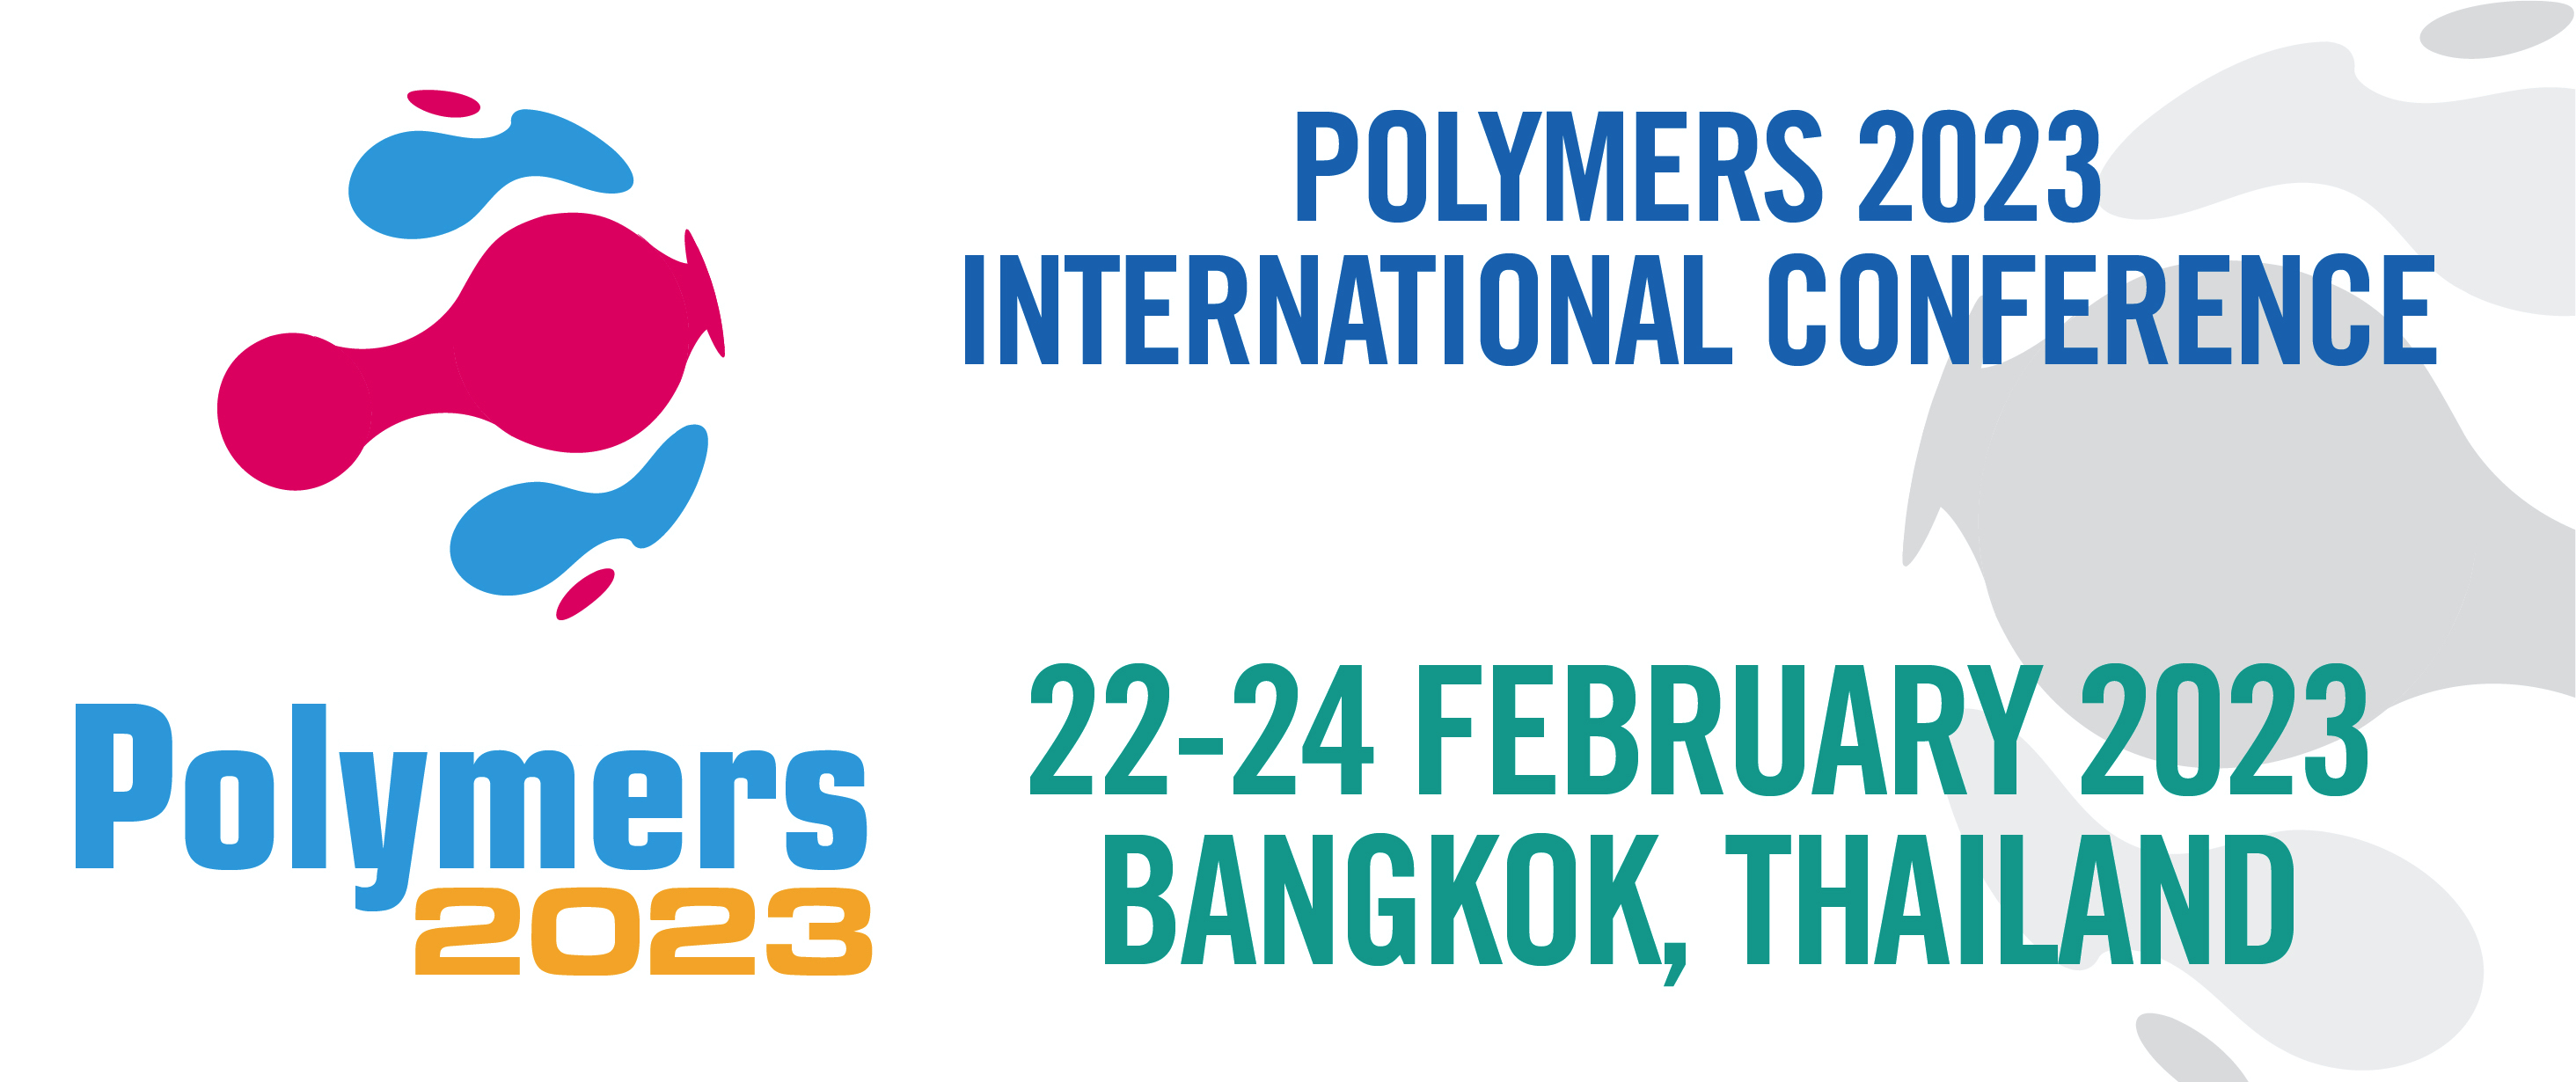 Polymers 2023 International Conference